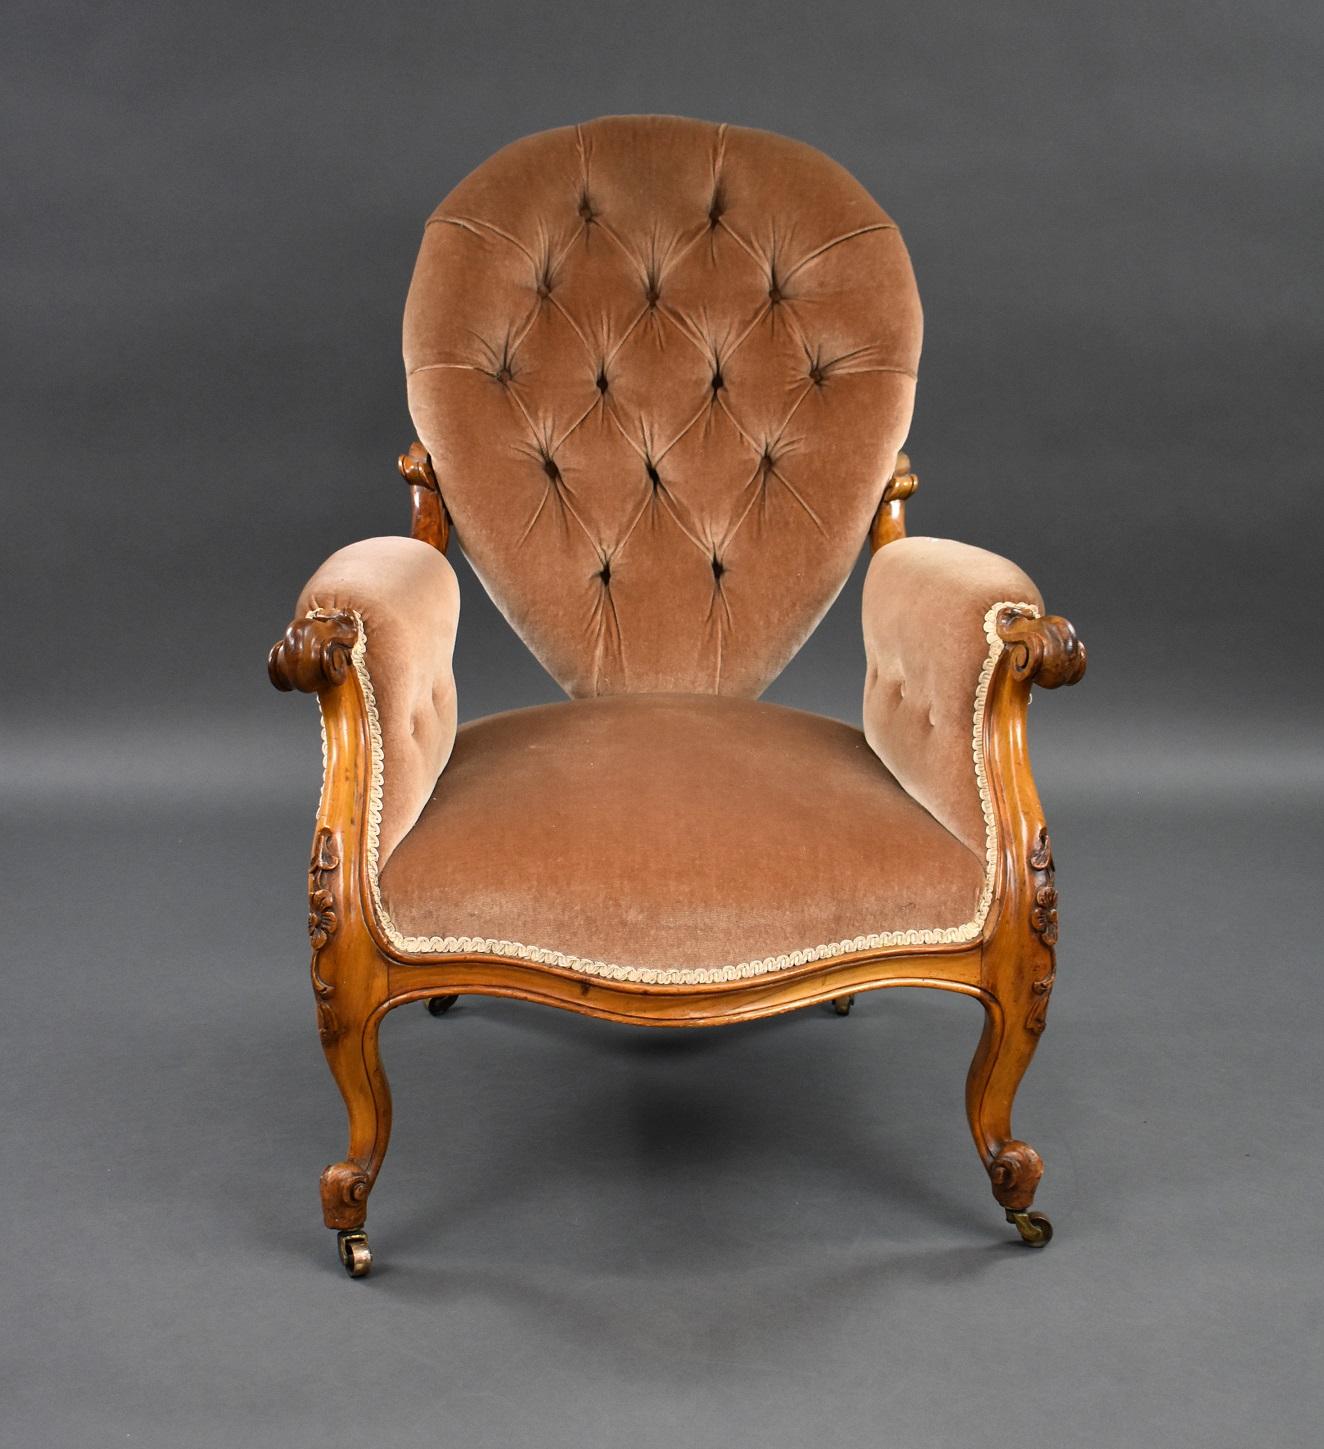 Victorian walnut armchair in good condition with buttoned pear drop shaped back with serpentine front, scroll arms standing on carved cabriole legs on castors. Structurally sound.